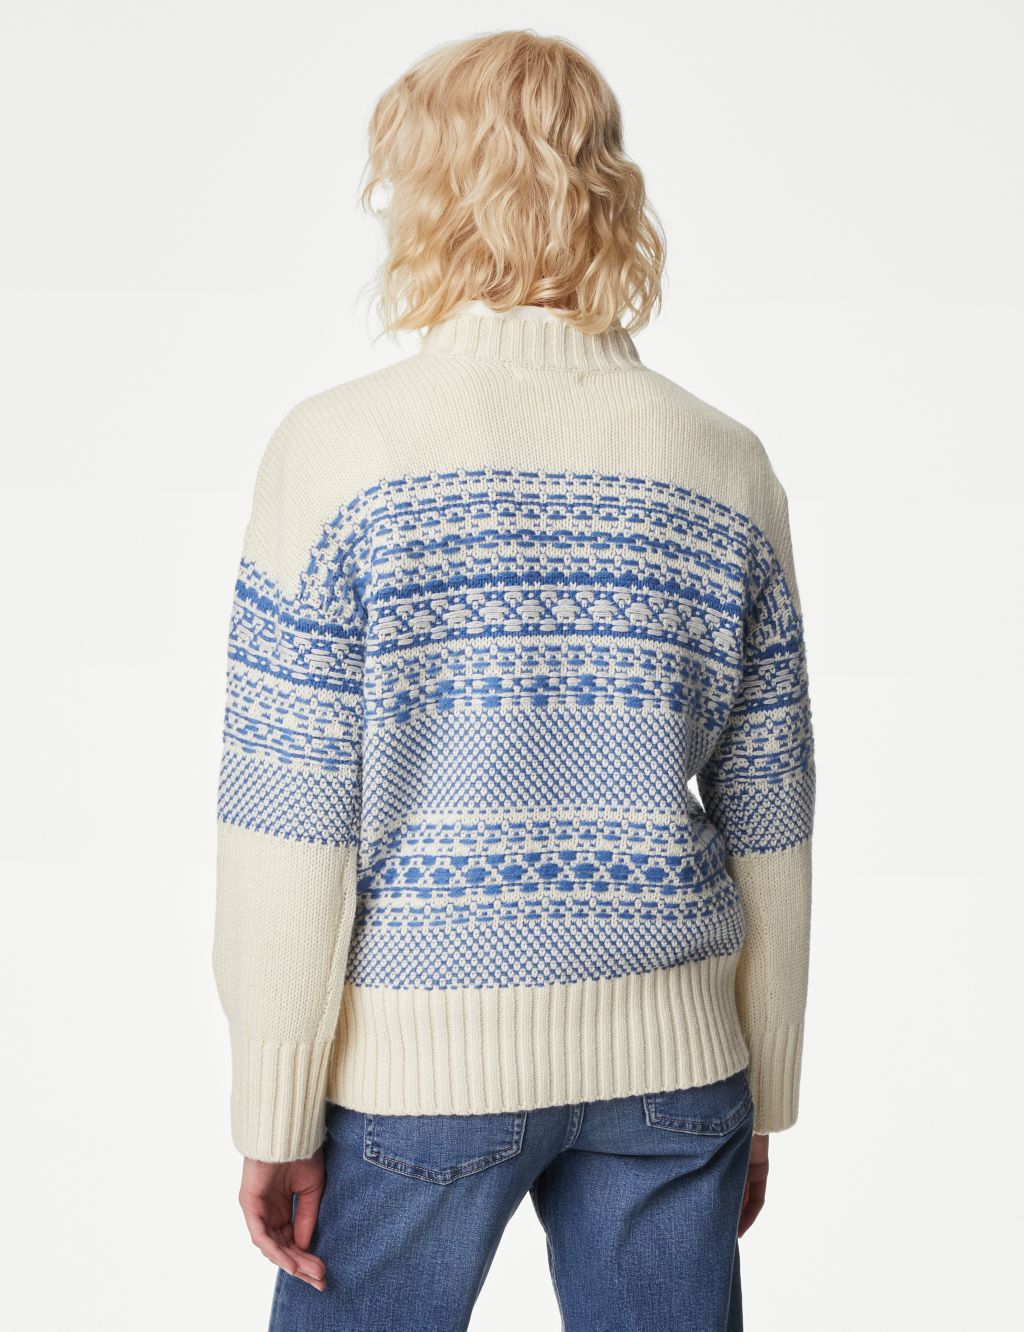 Fair Isle Ribbed Jumper with Wool image 5